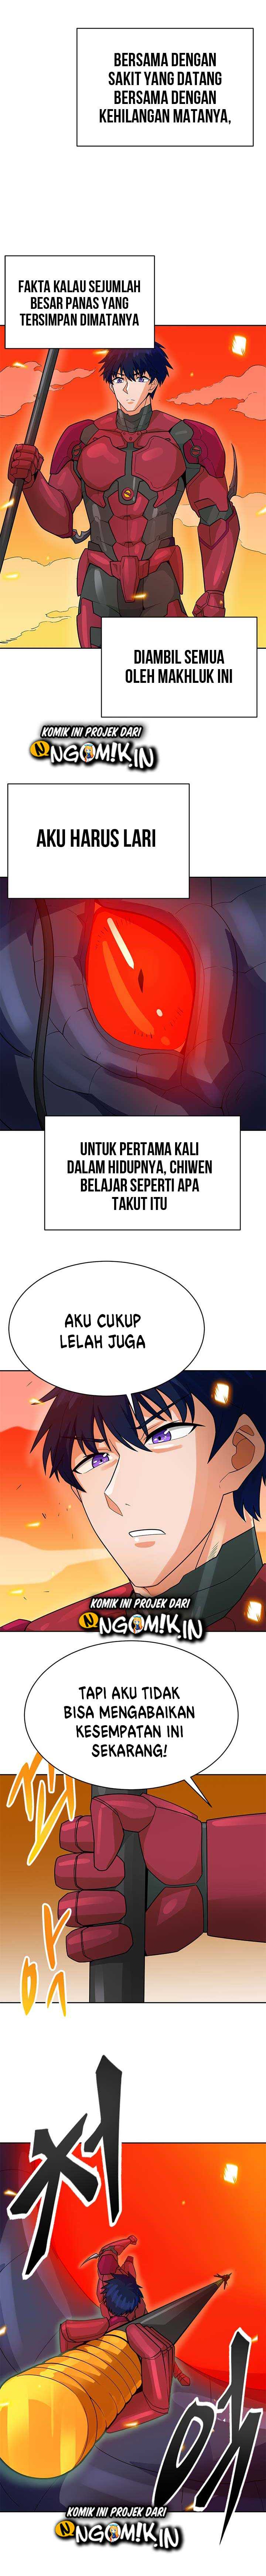 Auto Hunting Chapter 88